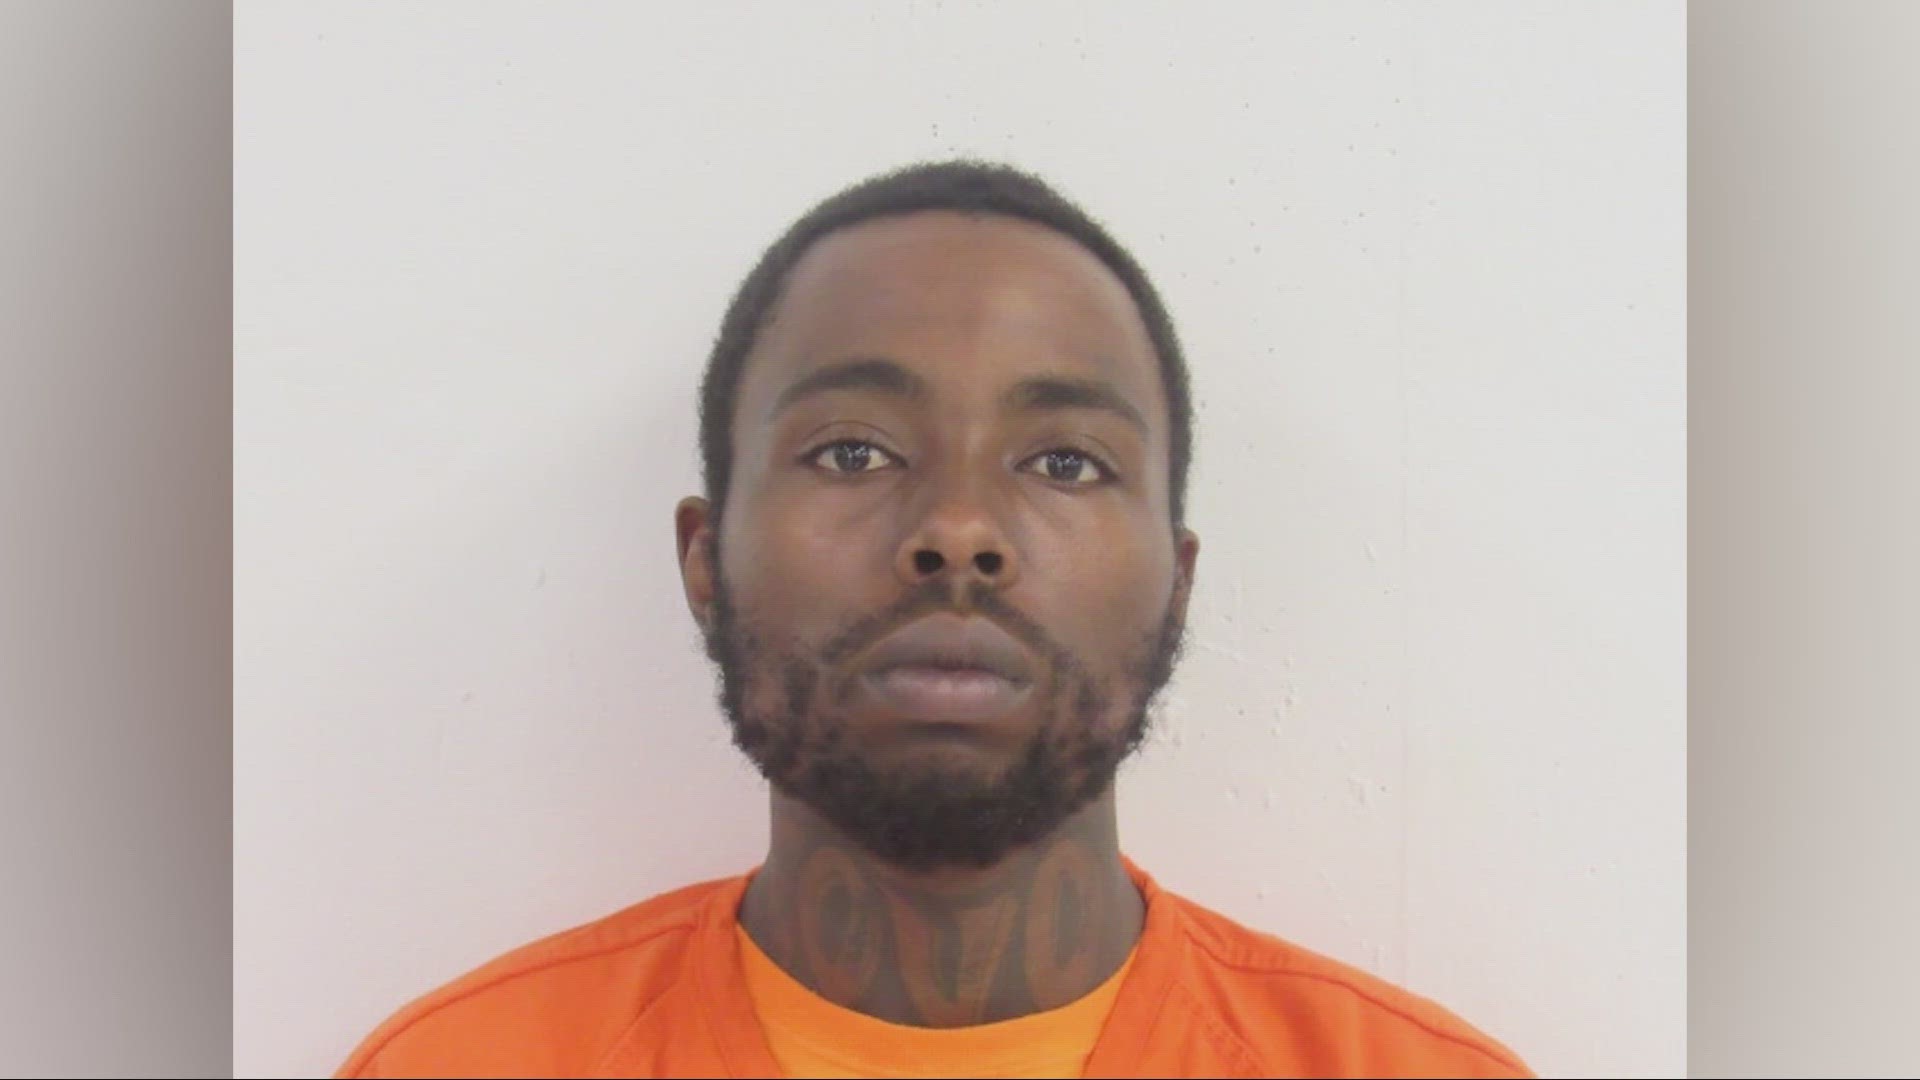 Jaylon Jennings, 25, is being charged with attempted murder, in connection to a mass shooting on West 6th Street.